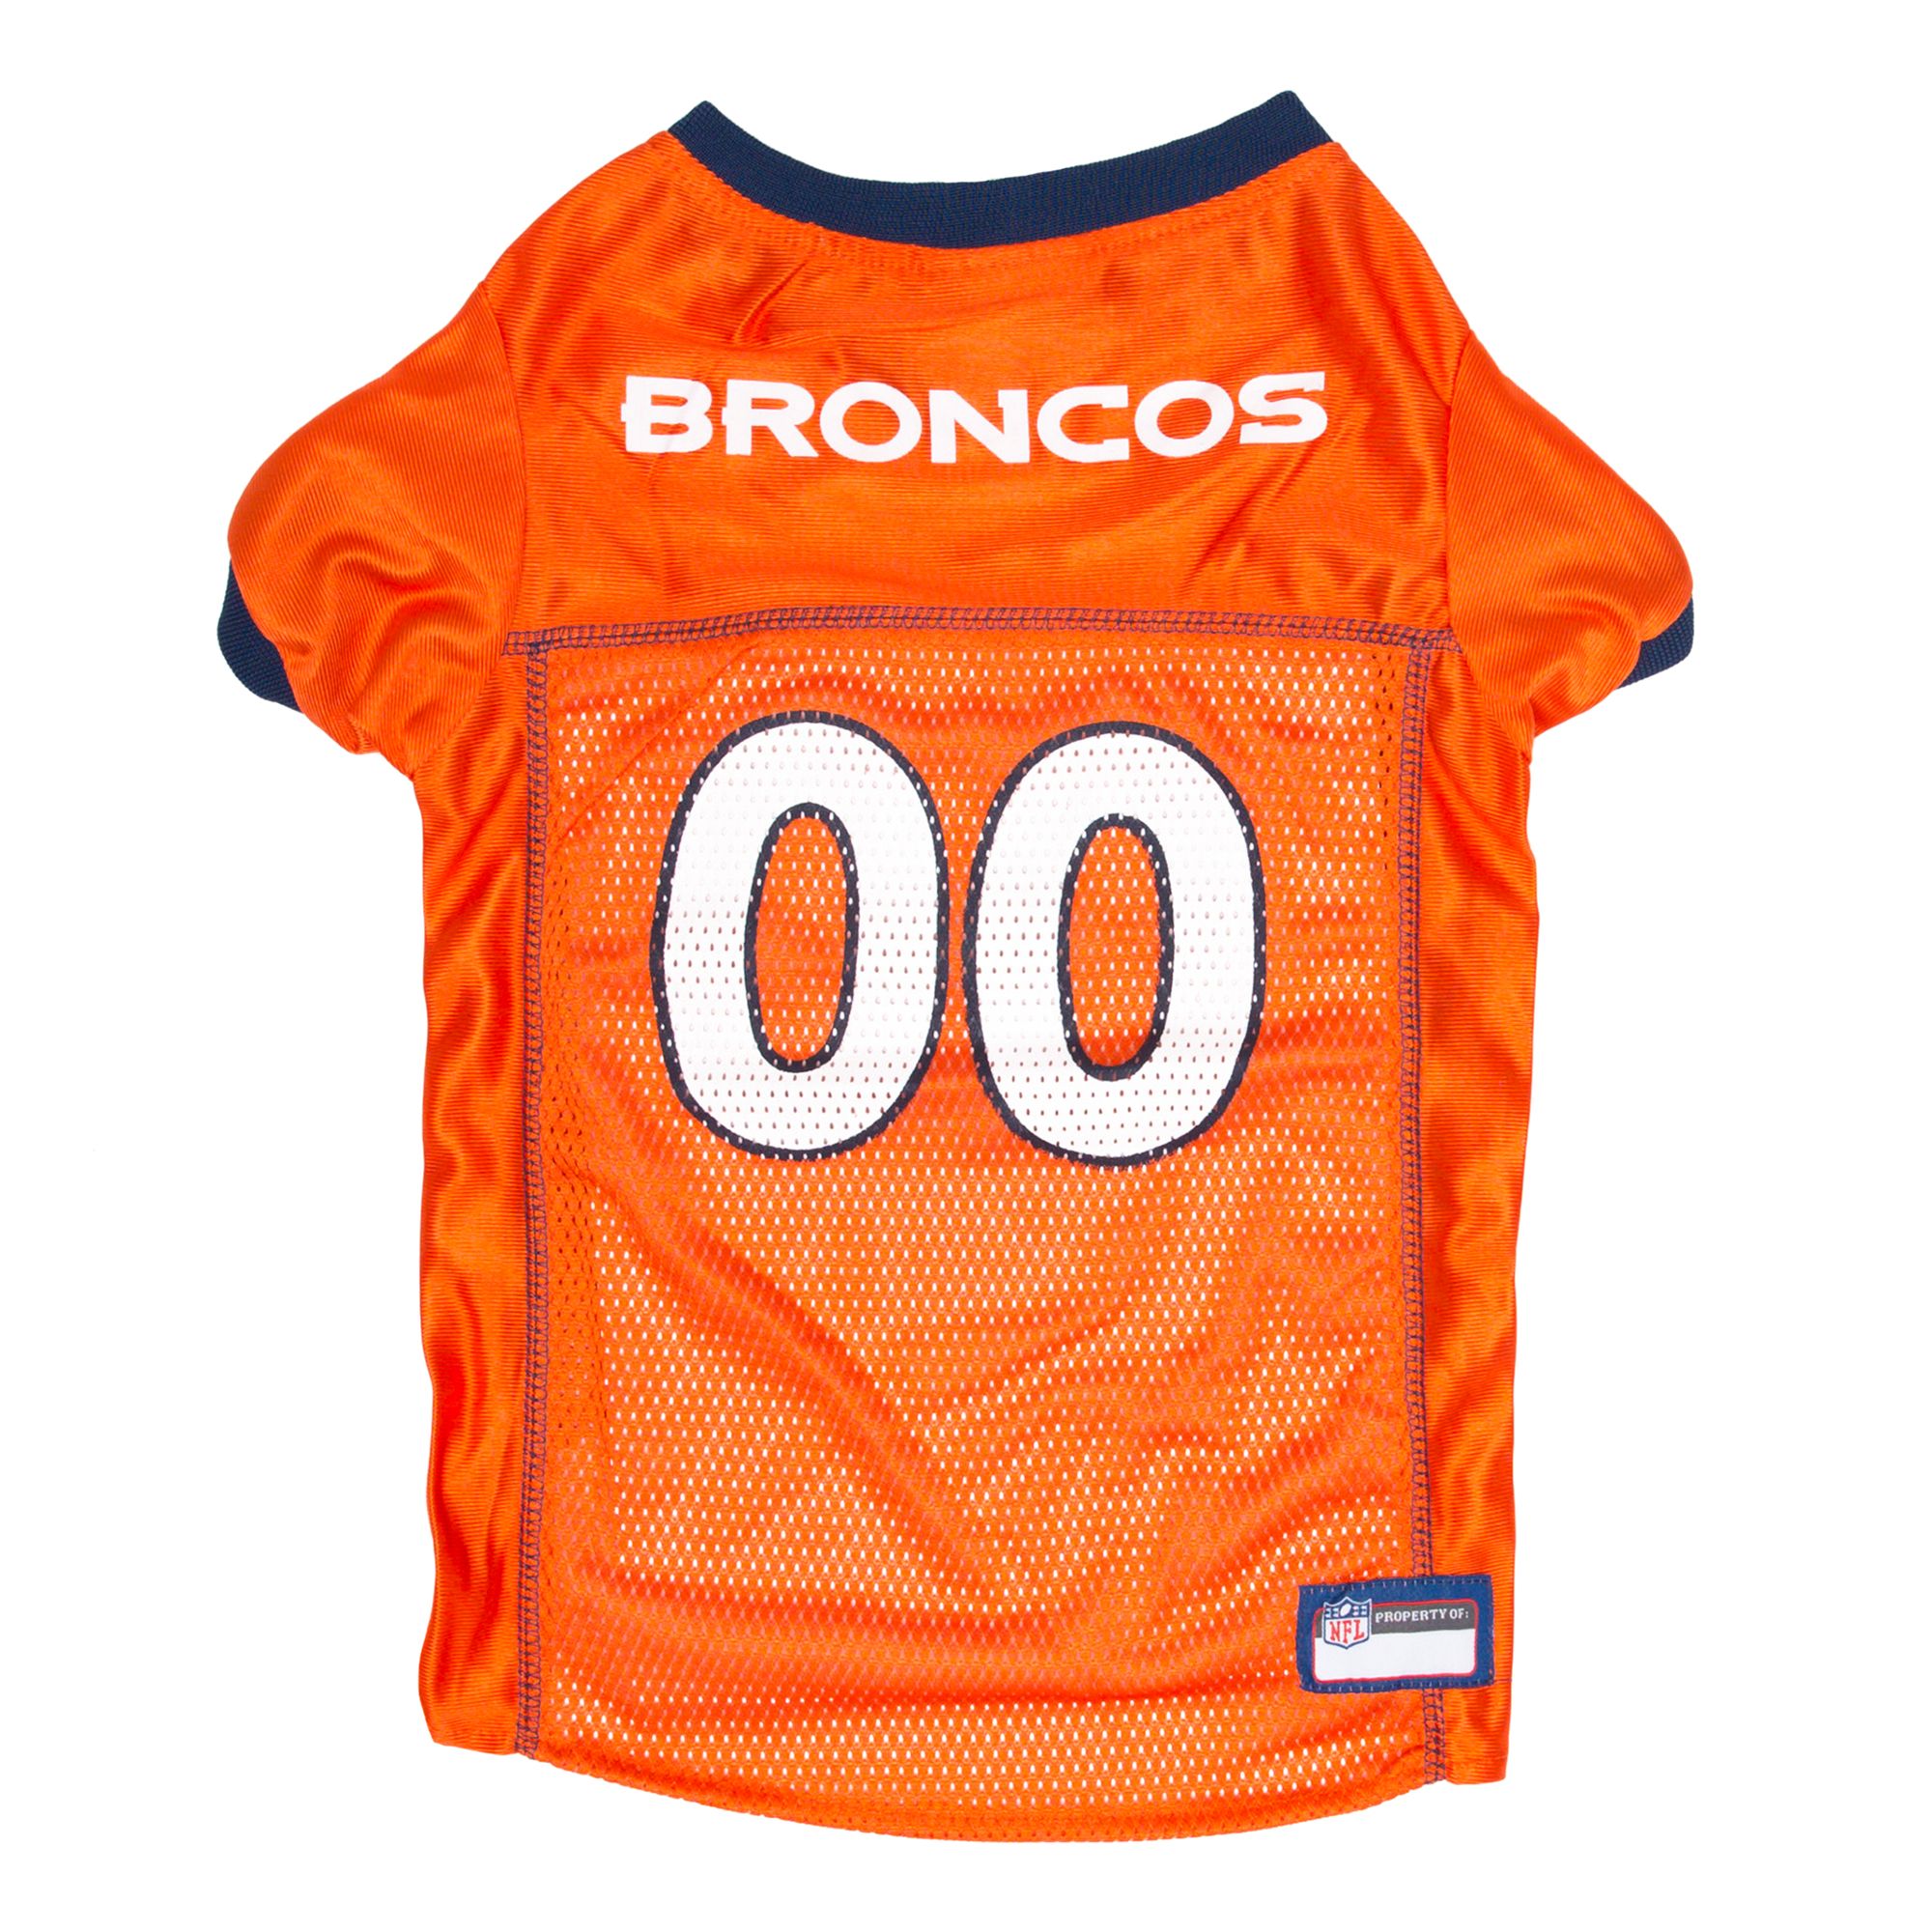 broncos jersey for dogs